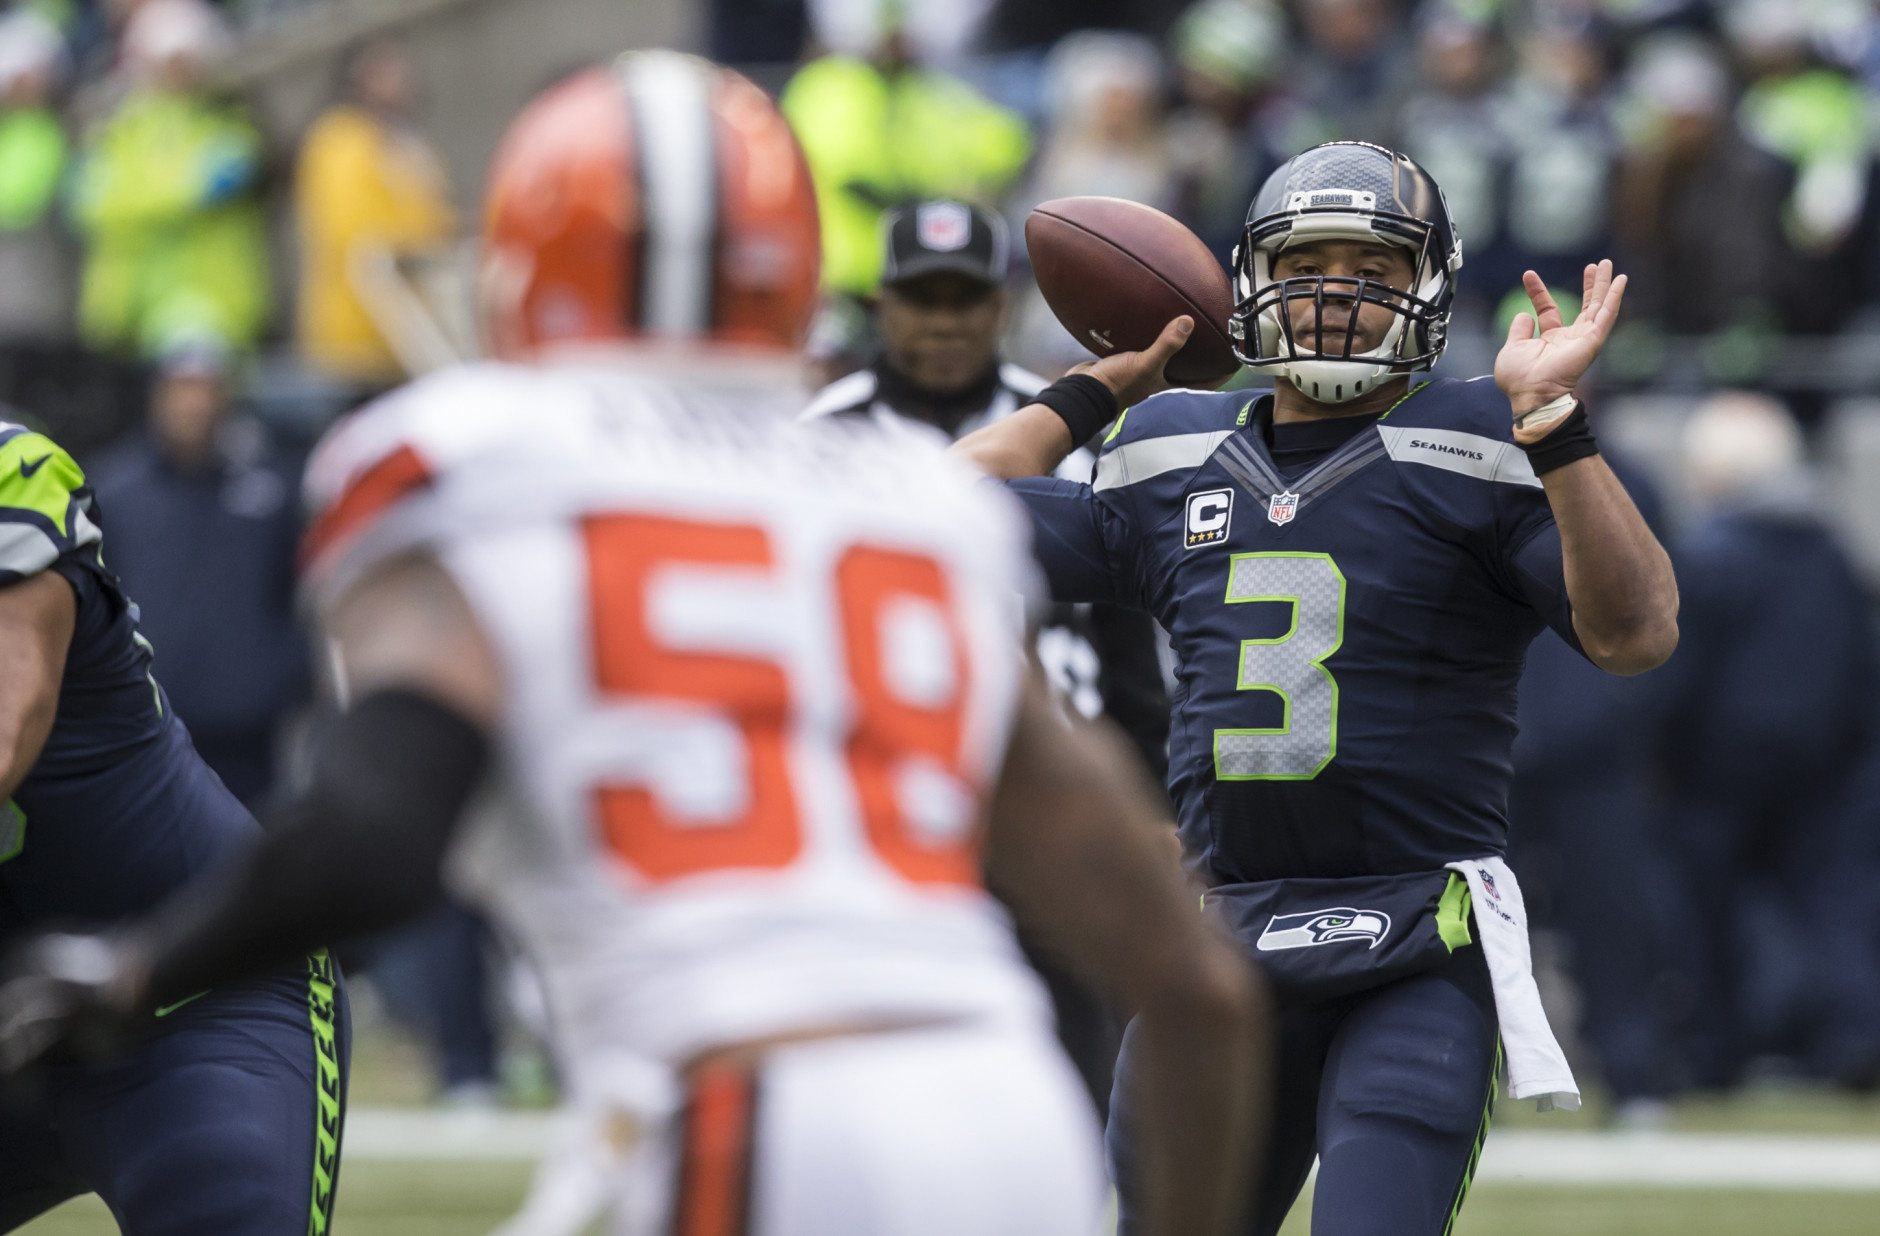 SEATTLE, WA - DECEMBER 20: Quarterback Russell Wilson #3 of the Seattle Seahawks passes the ball during the first half of a football game against the Cleveland Browns at CenturyLink Field on December 20, 2015 in Seattle, Washington. (Photo by Stephen Brashear/Getty Images)